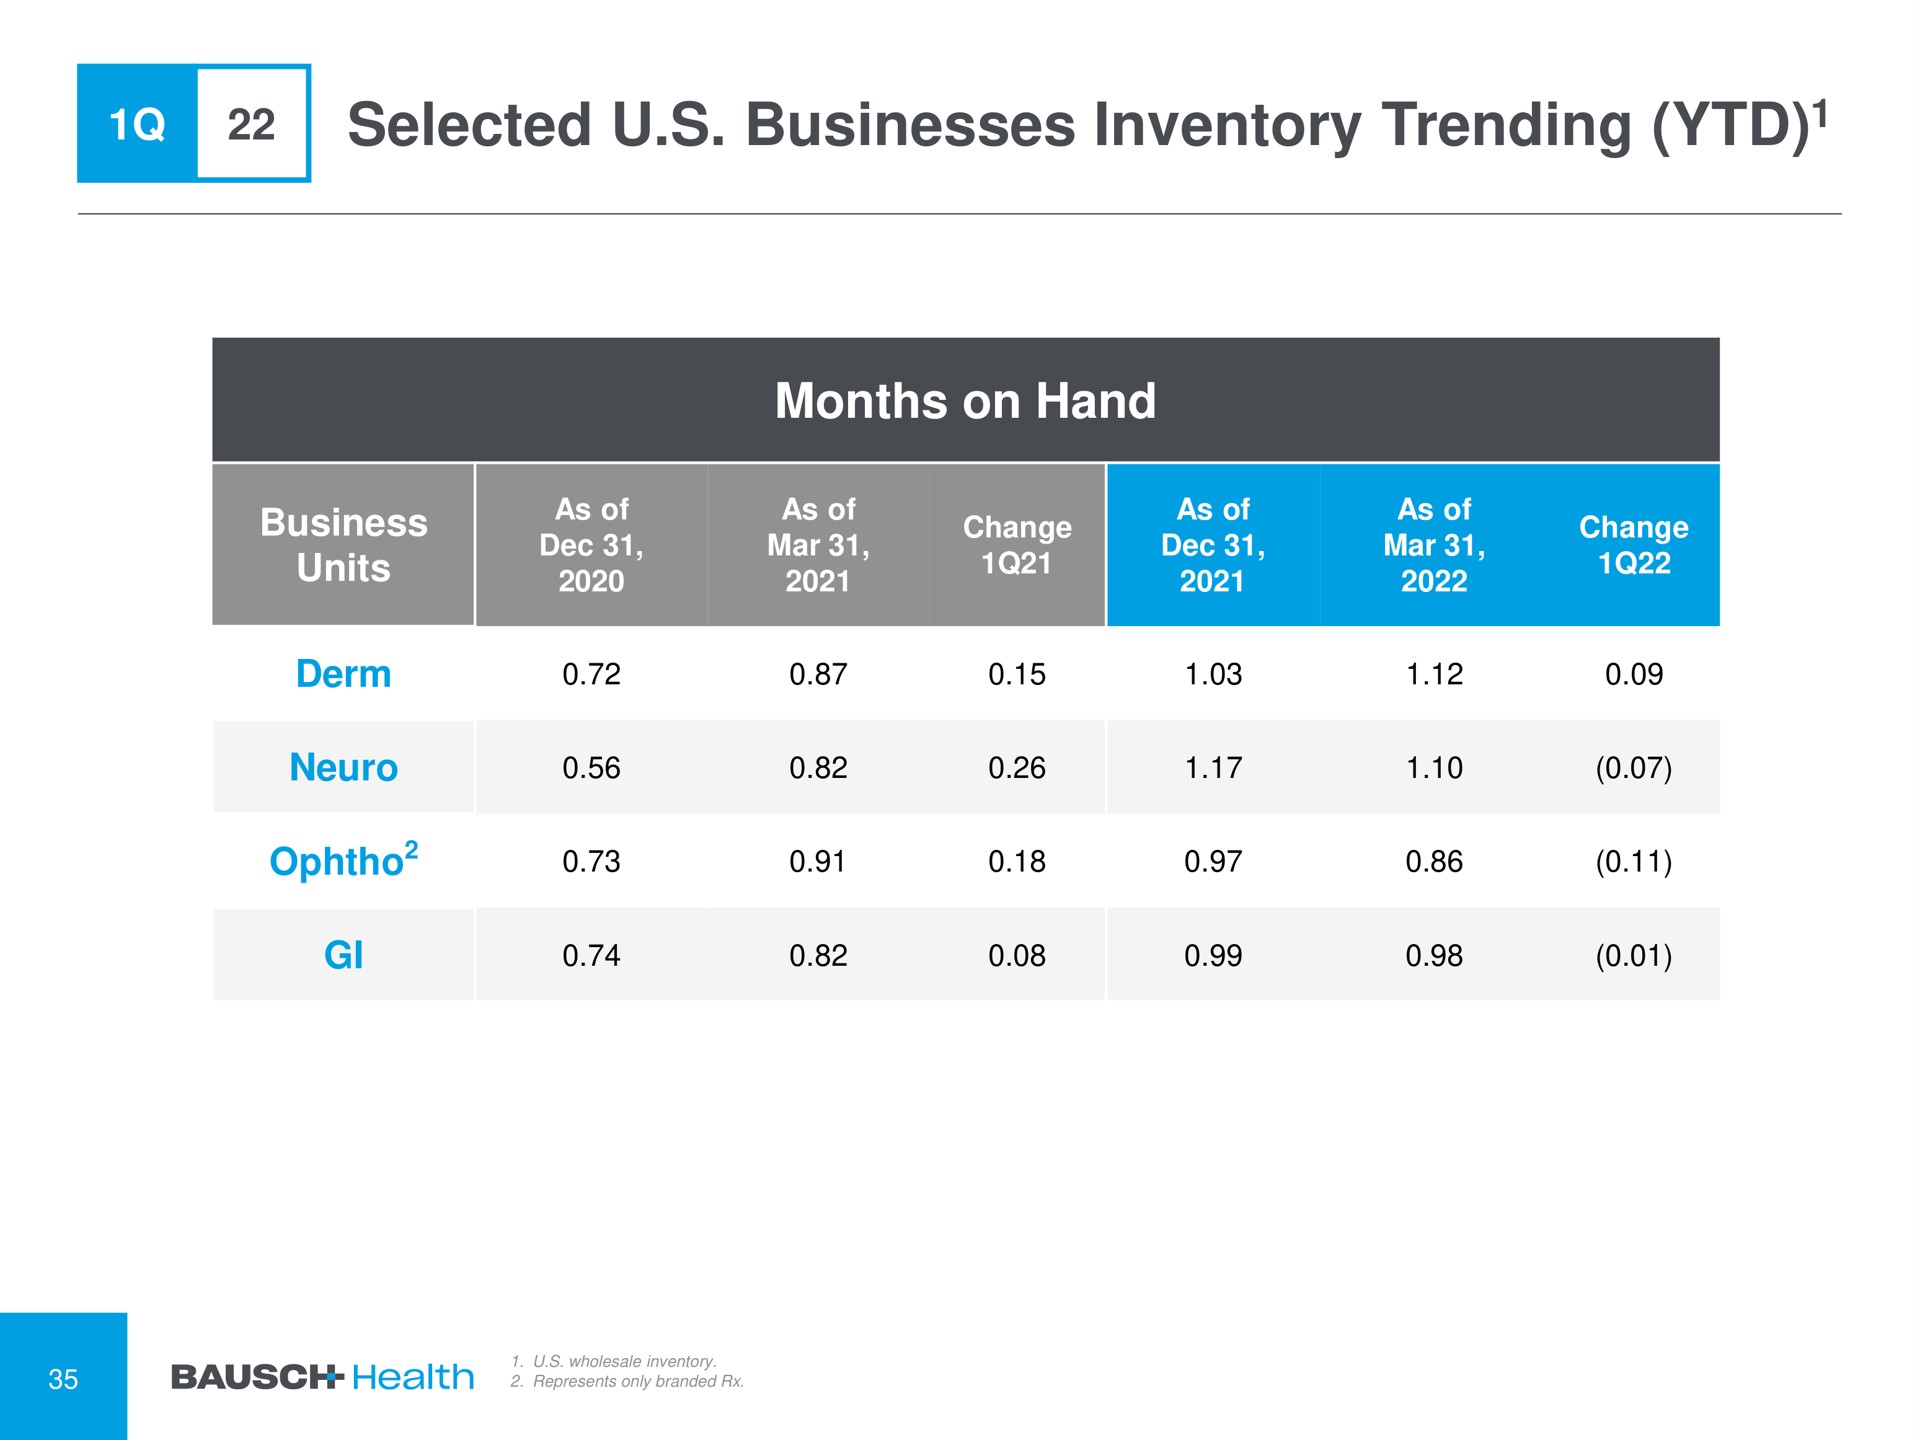 selected businesses inventory trending derm | Bausch Health Companies